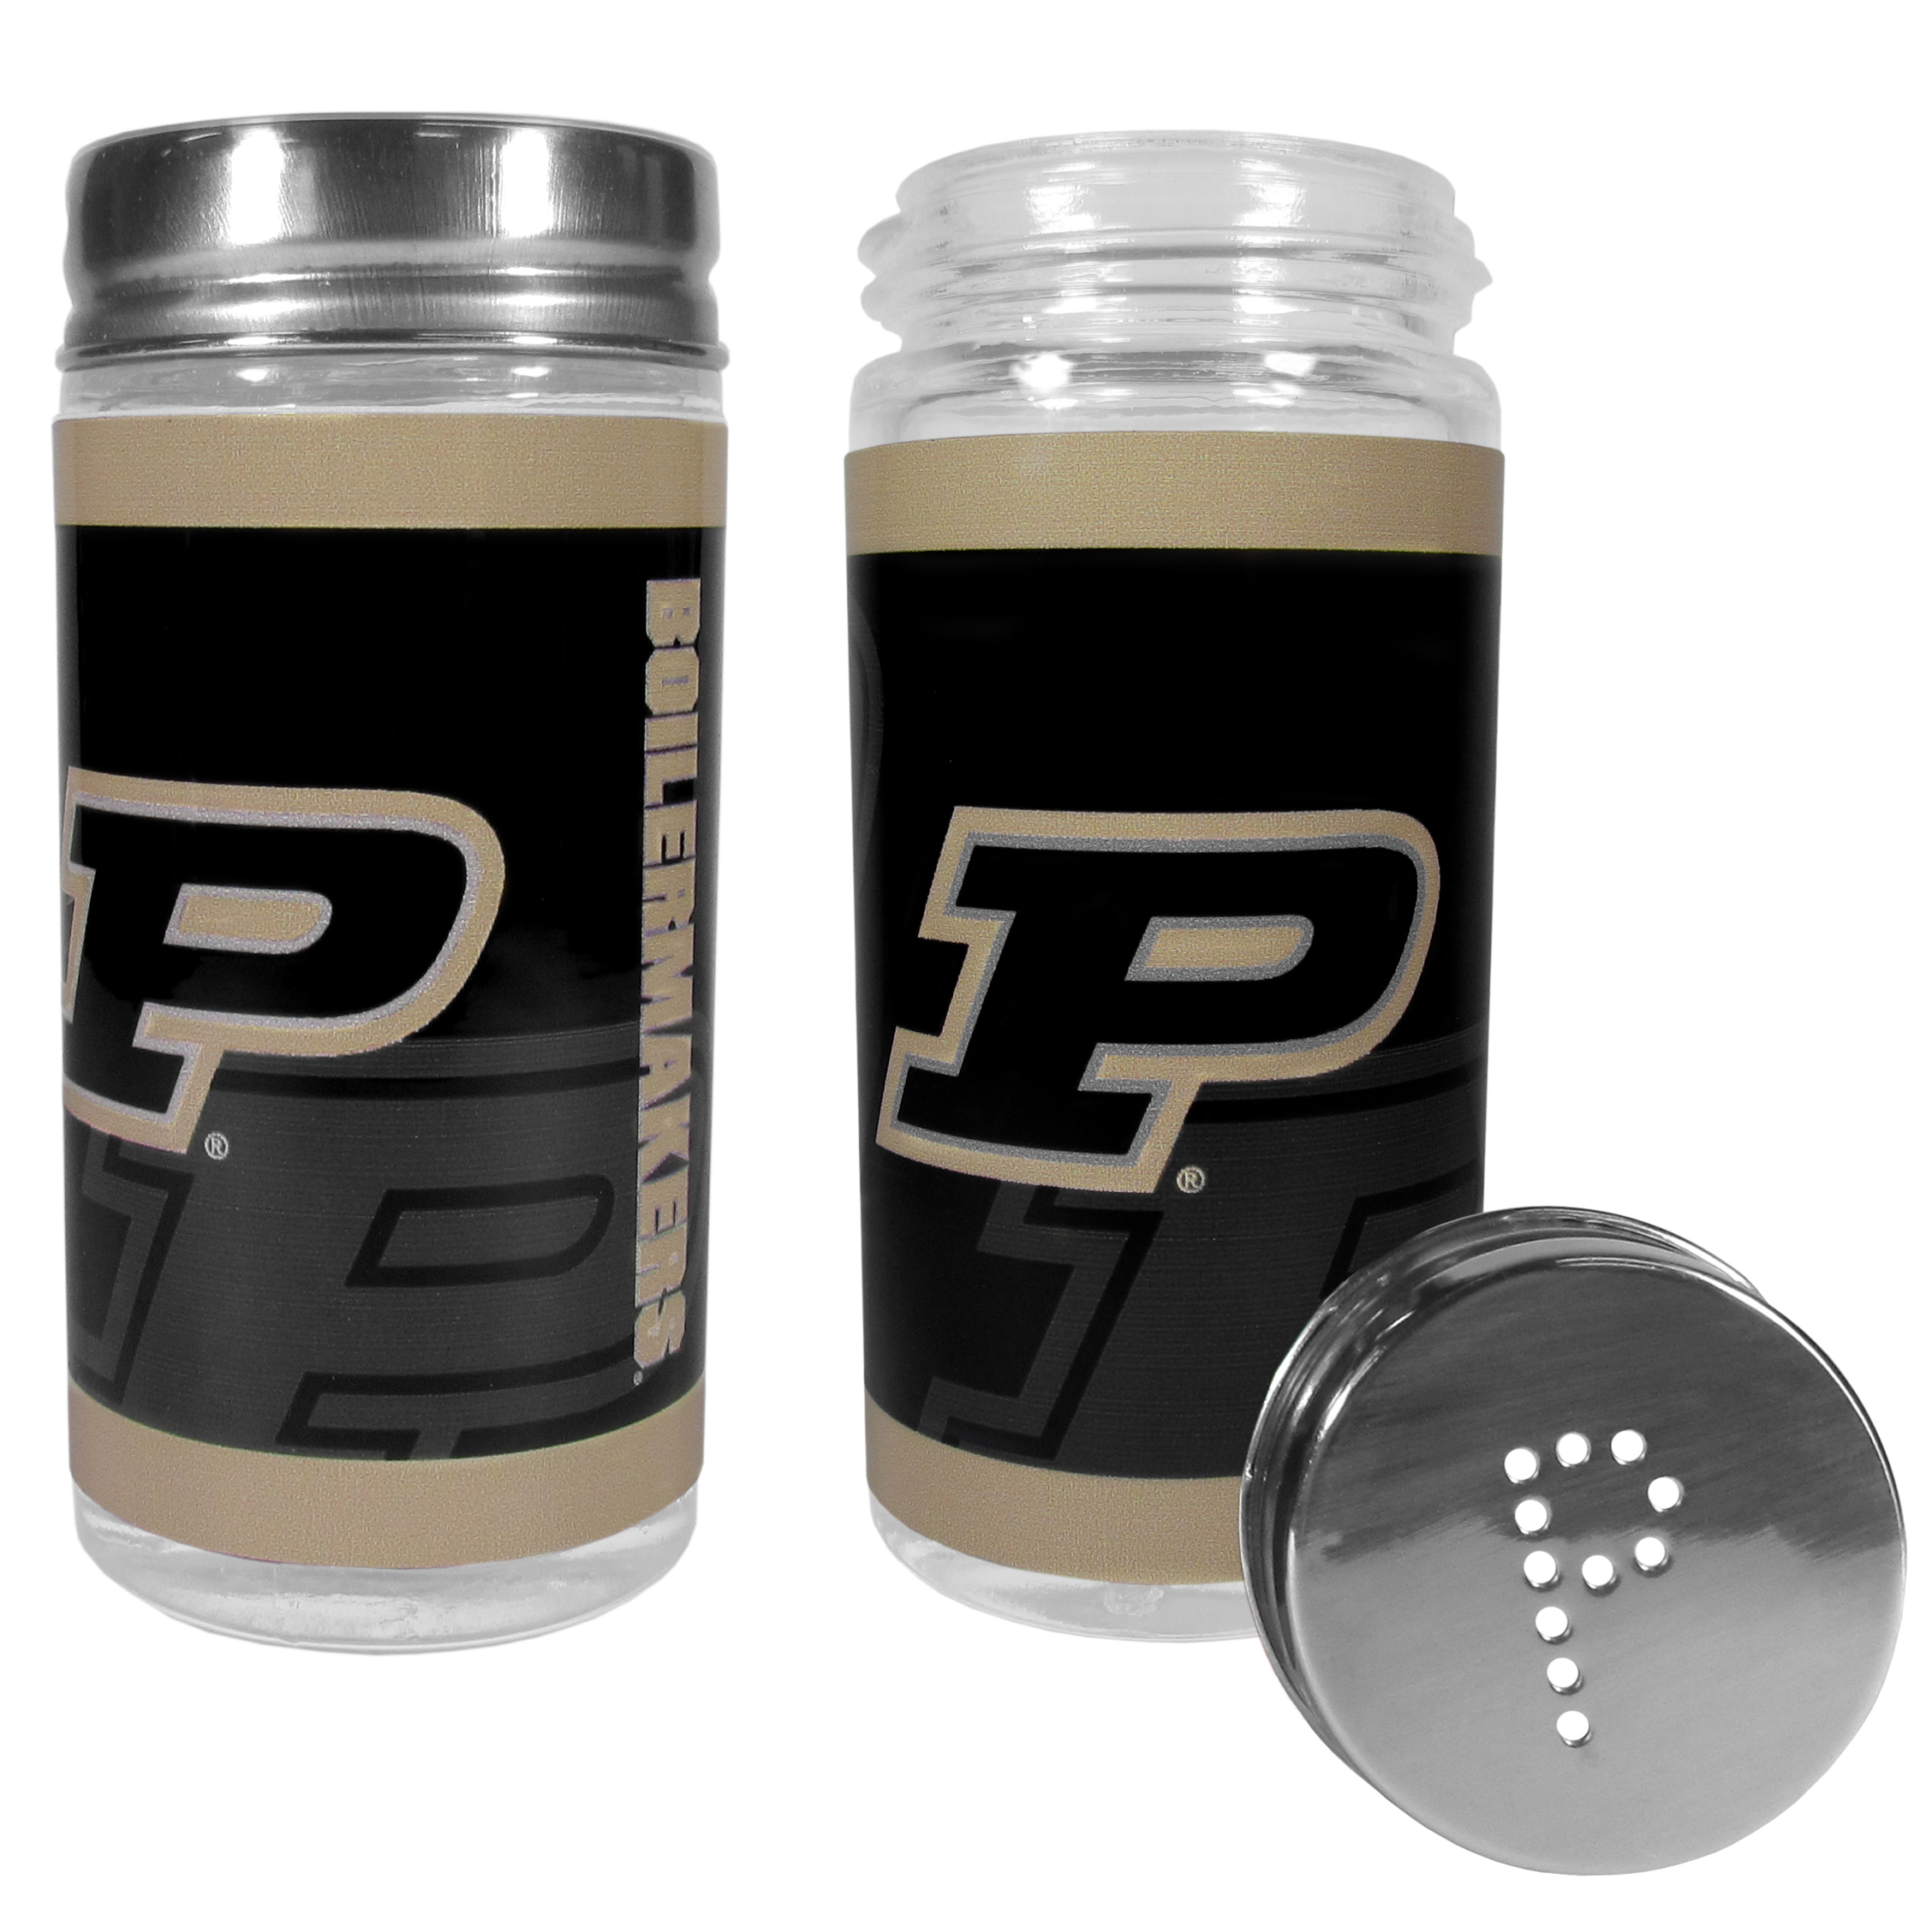 Purdue Boilermakers Salt and Pepper Shakers Tailgater Special Order